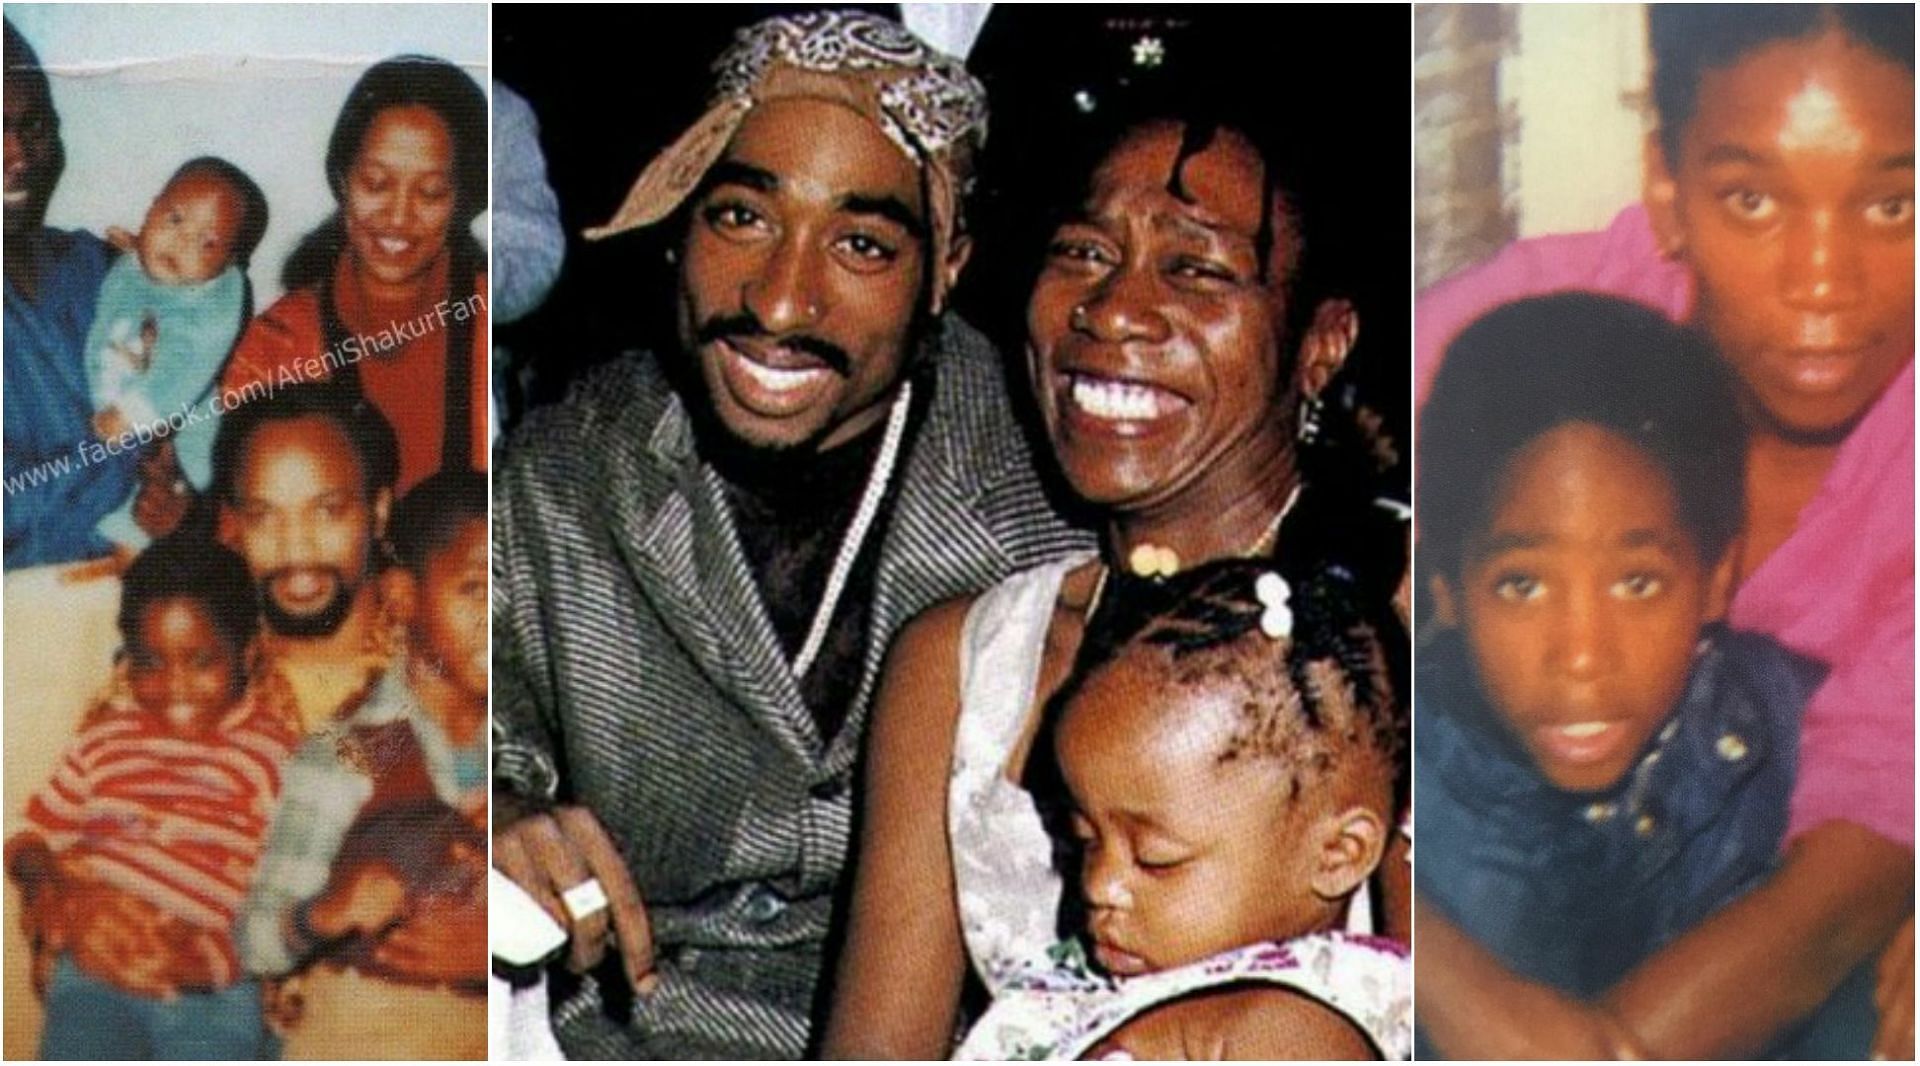 Tupac Shakur&#039;s sister Sekyiwa alleges embezzlement by the executor of her brother&#039;s estate (Images via Pinterest)